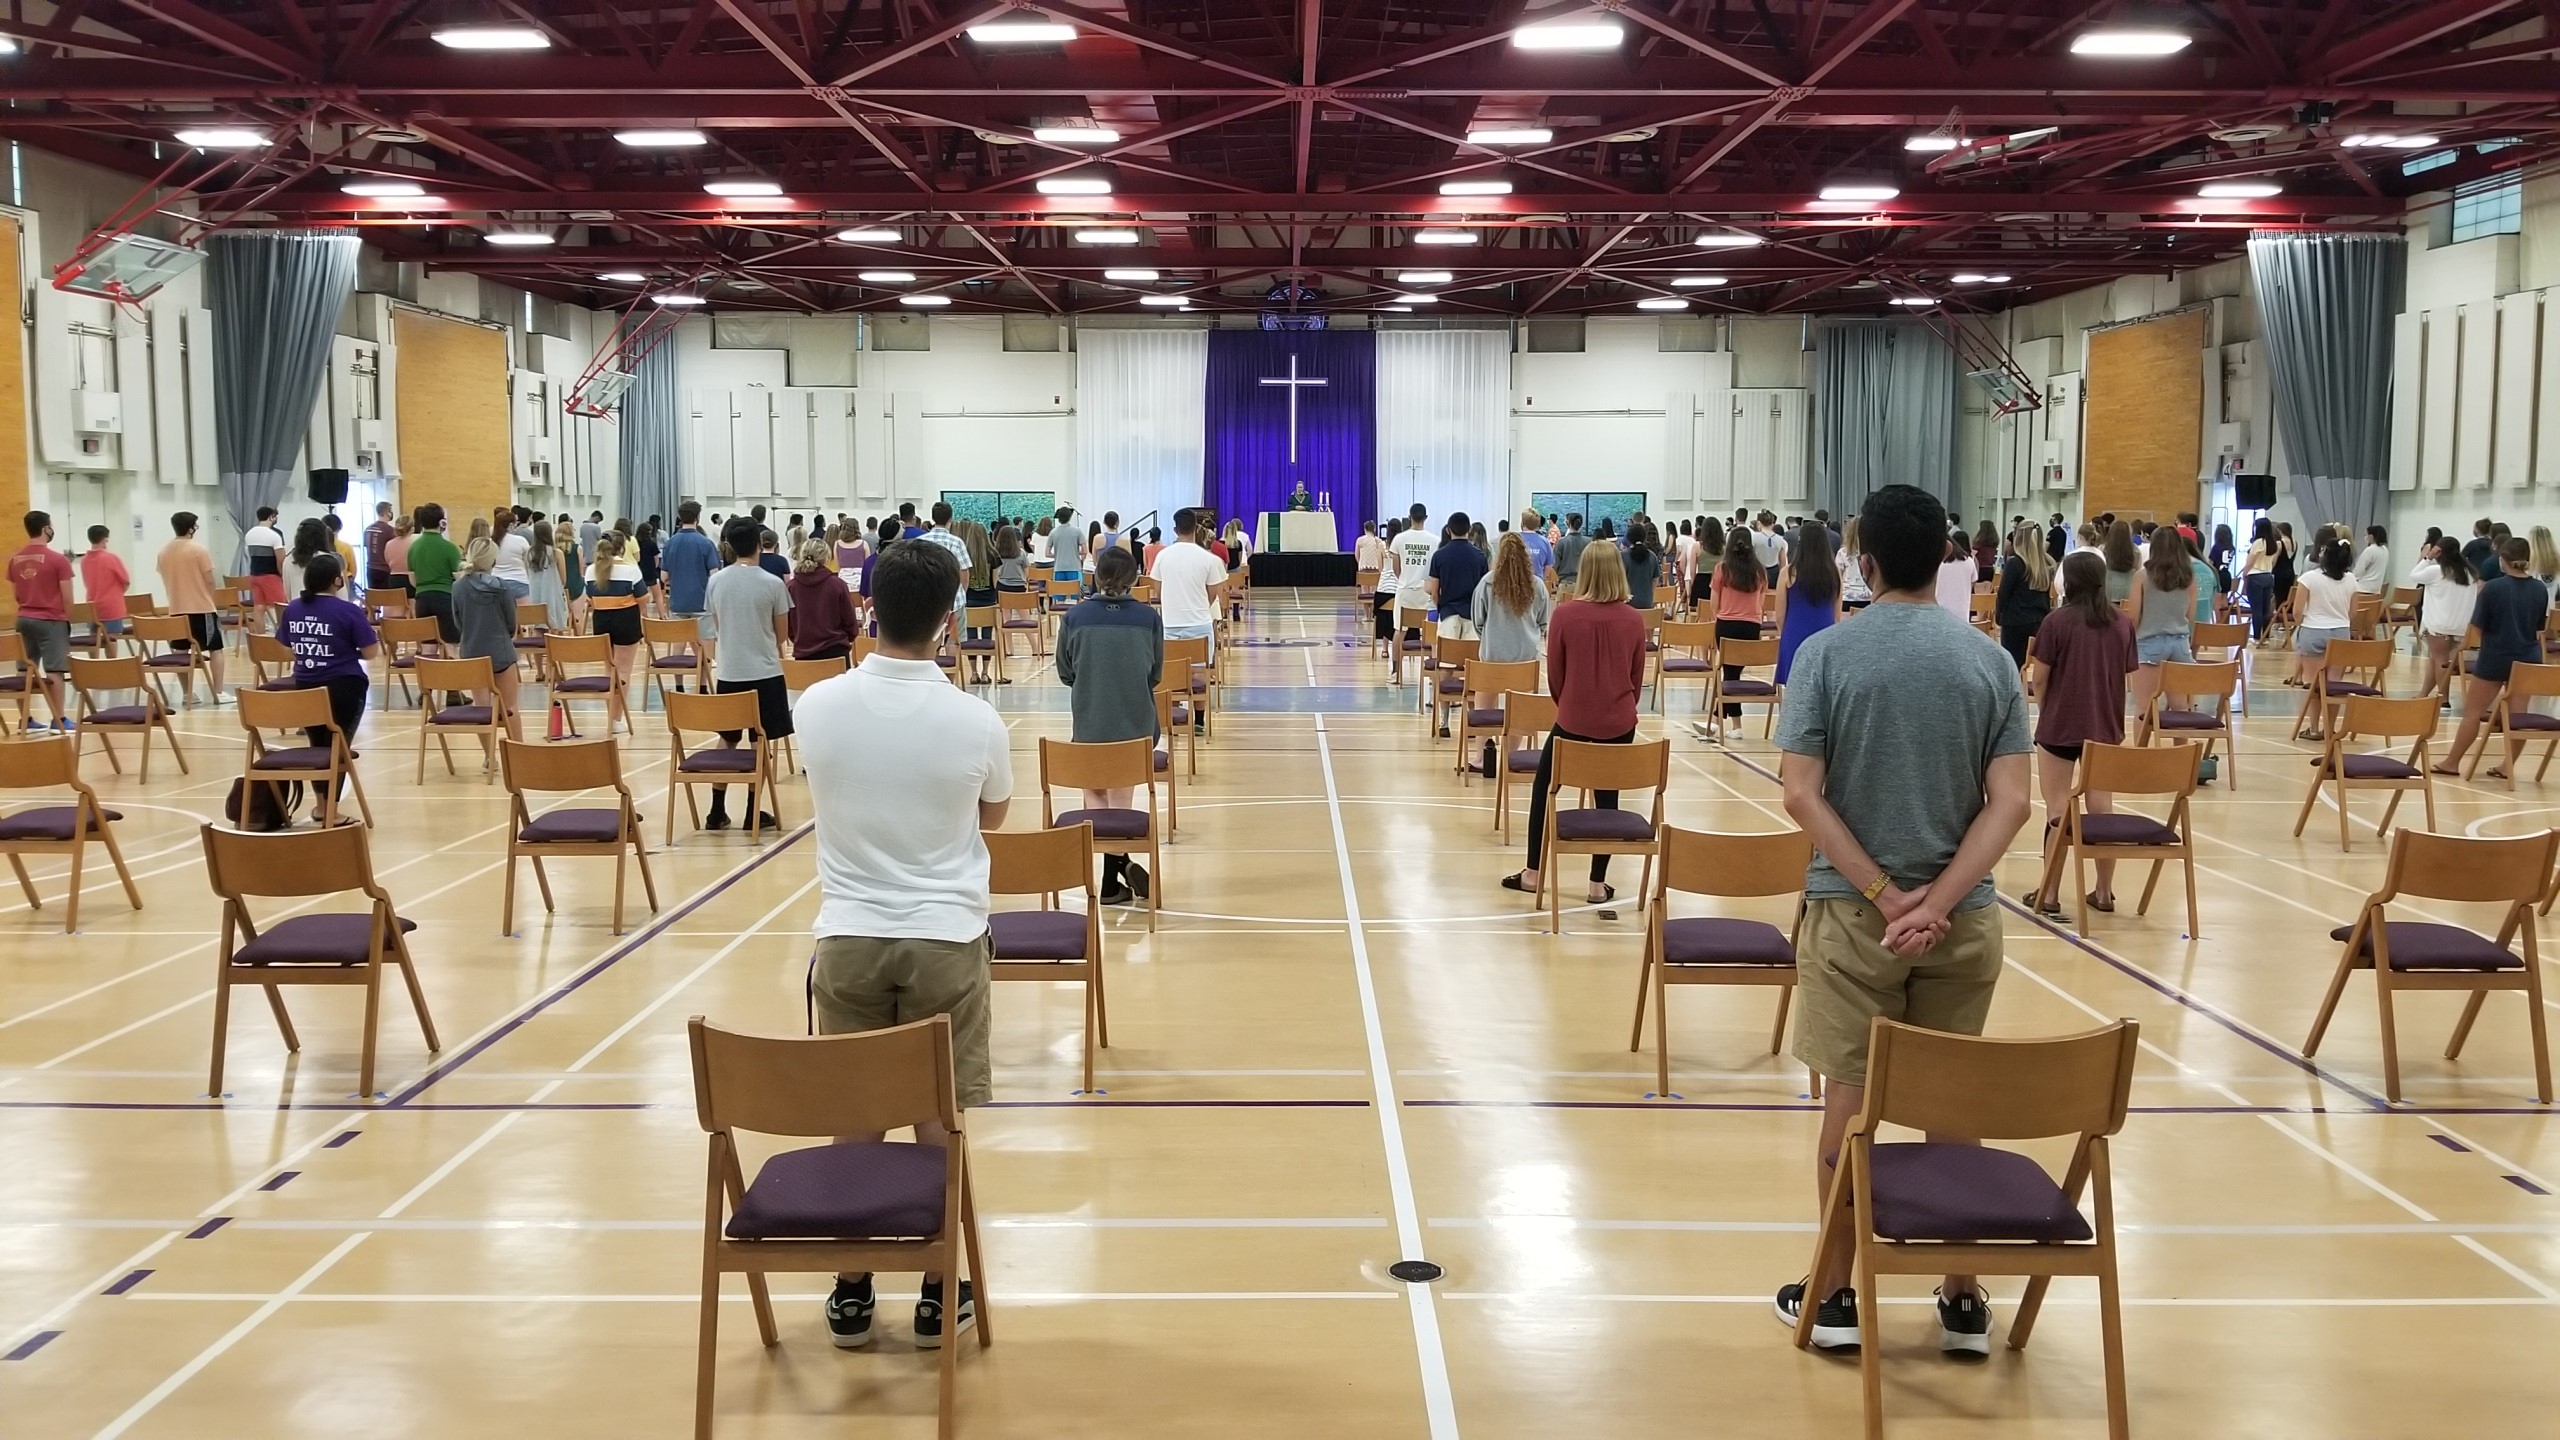 Safety Precautions at Masses Encourage University Community Members to Attend image